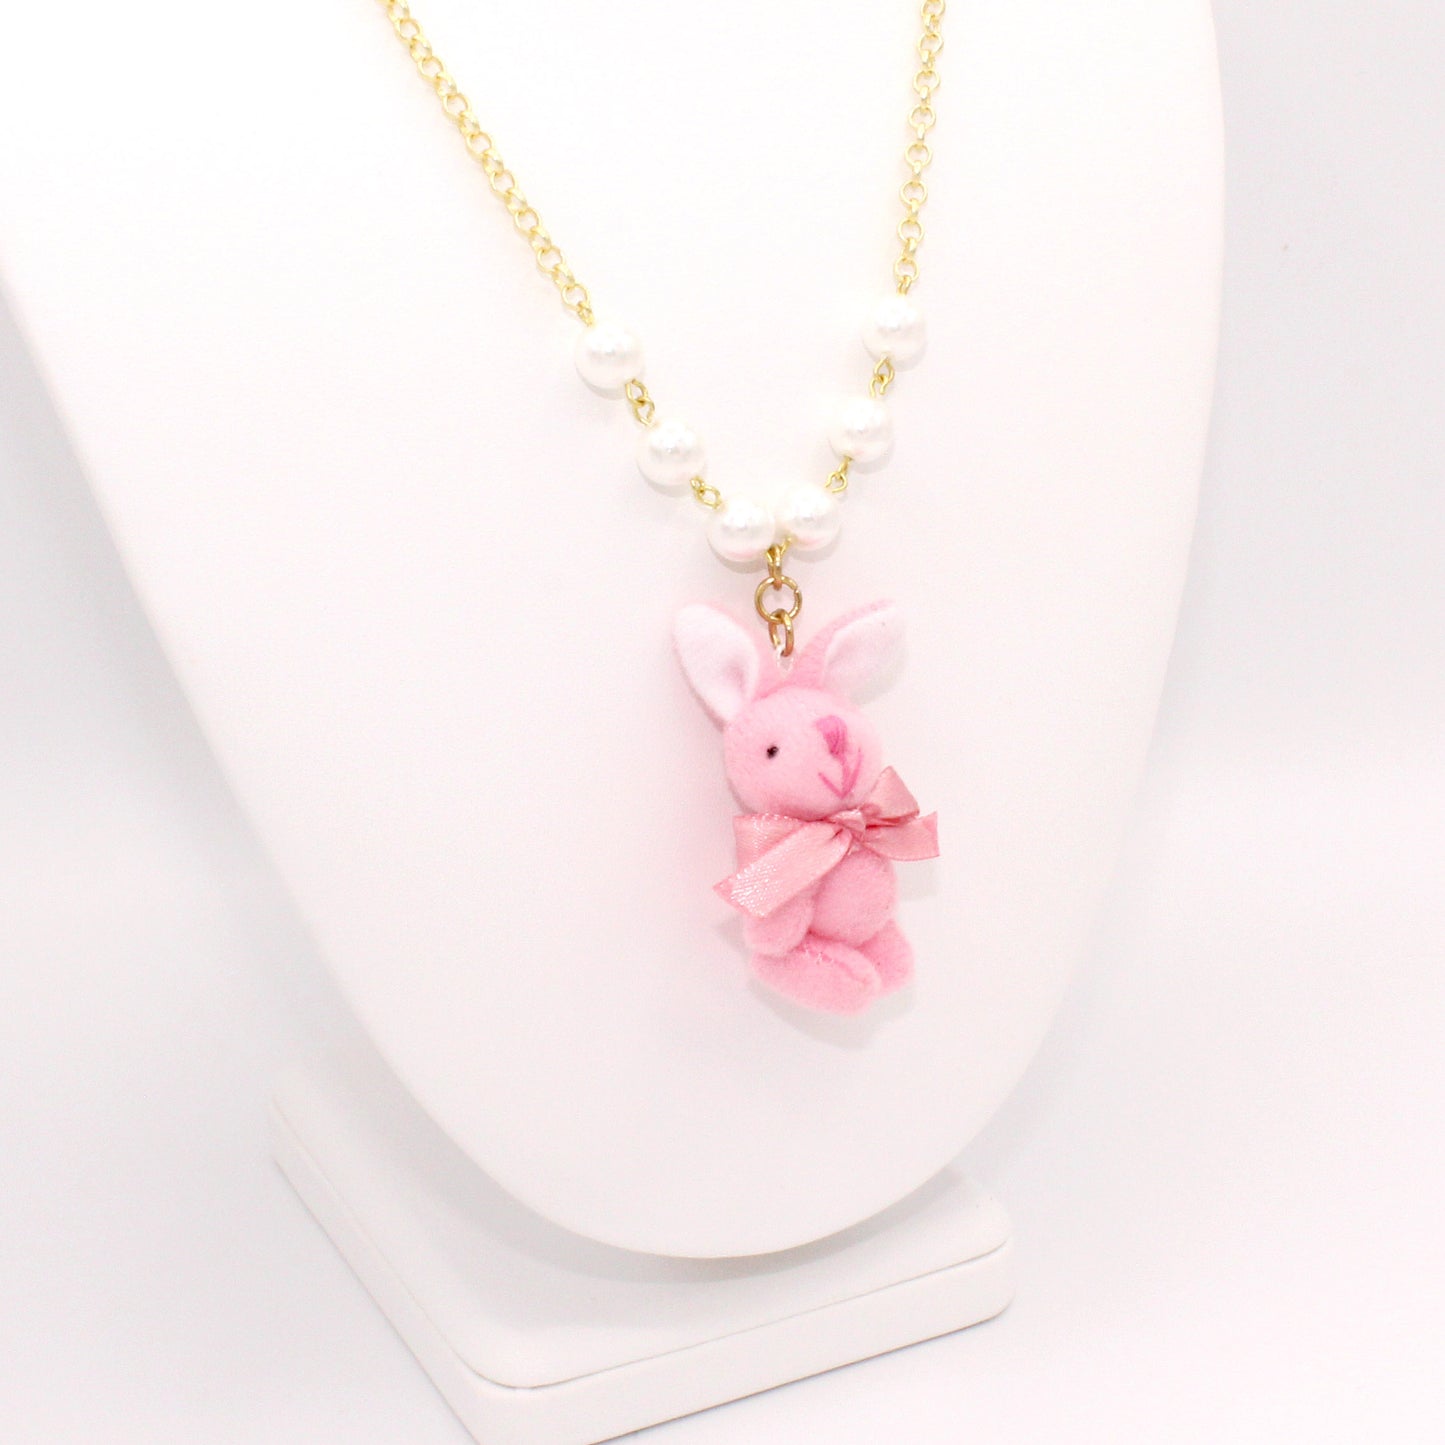 Pastel Bunny Necklace - Pink or White Plush Bunny - Fatally Feminine Designs